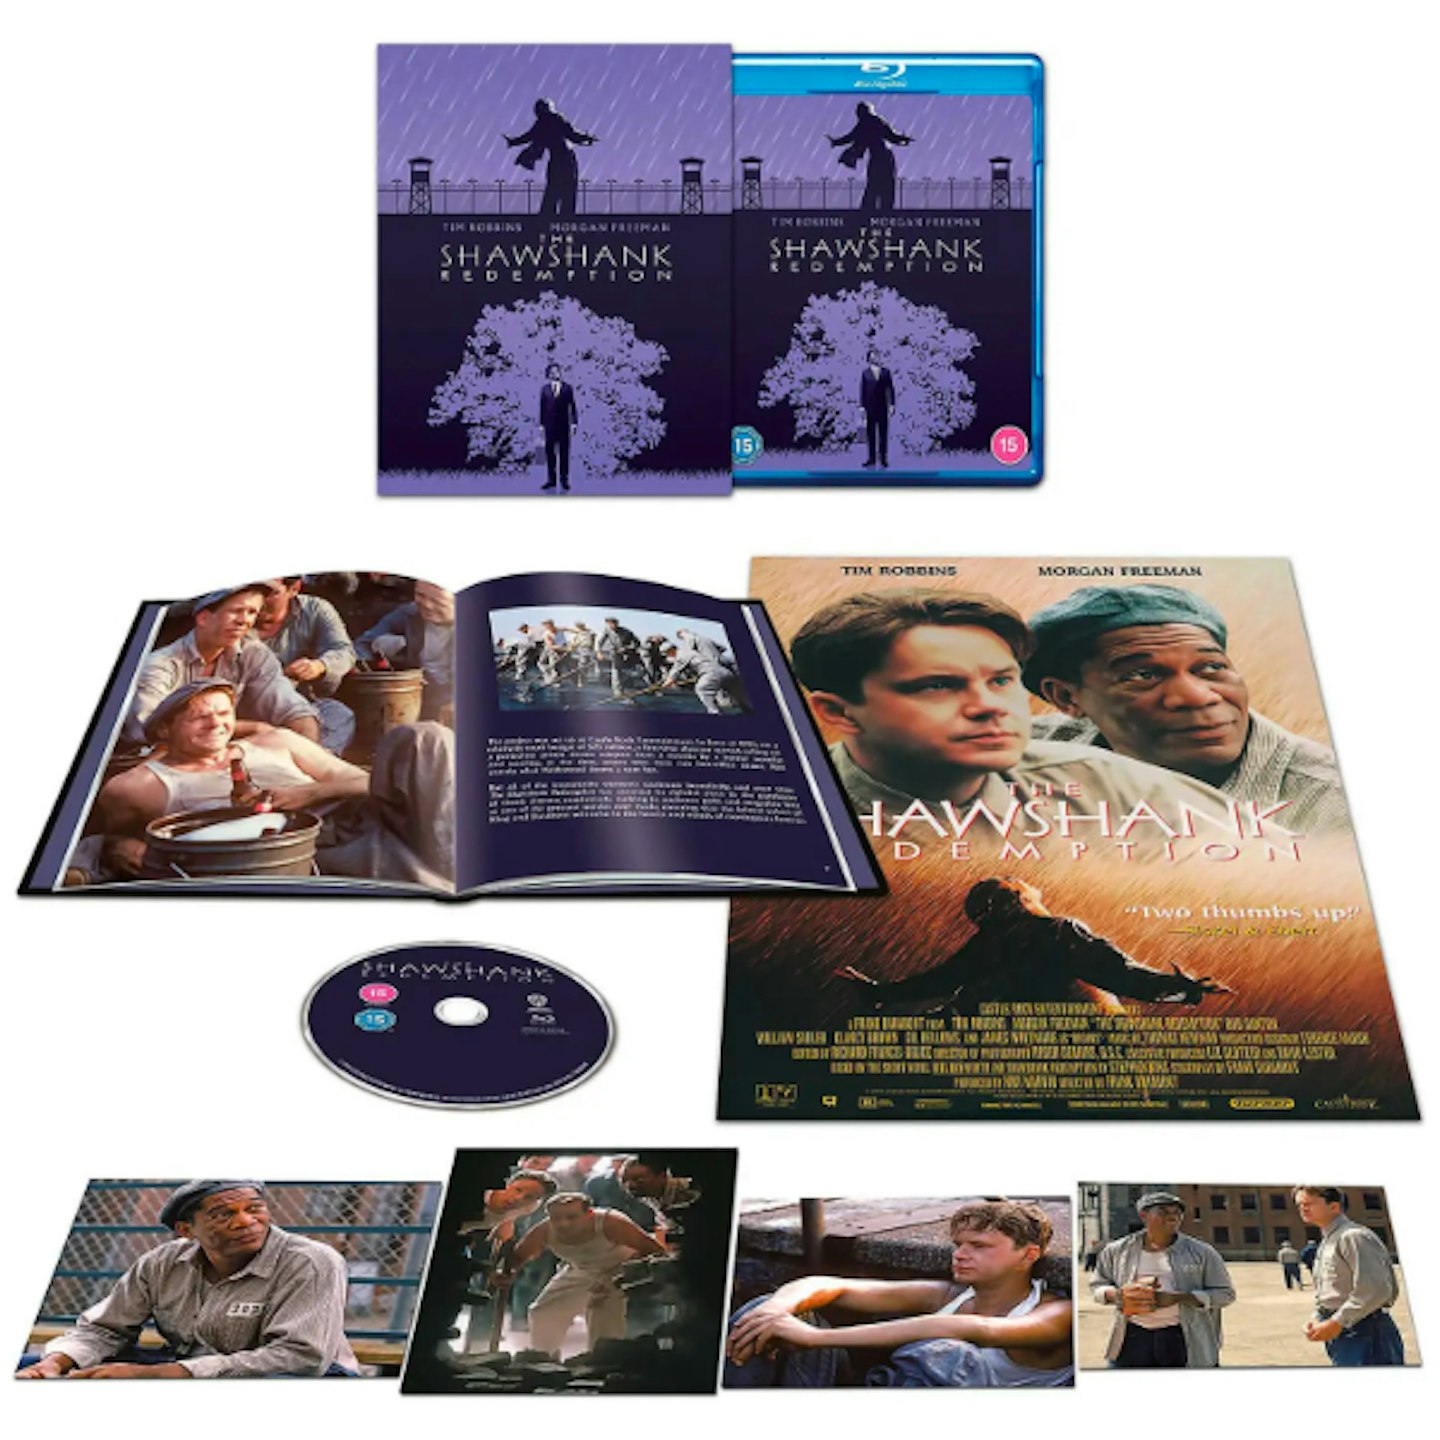 The Shawshank Redemption - Zavvi Exclusive Ultimate Collector's Edition